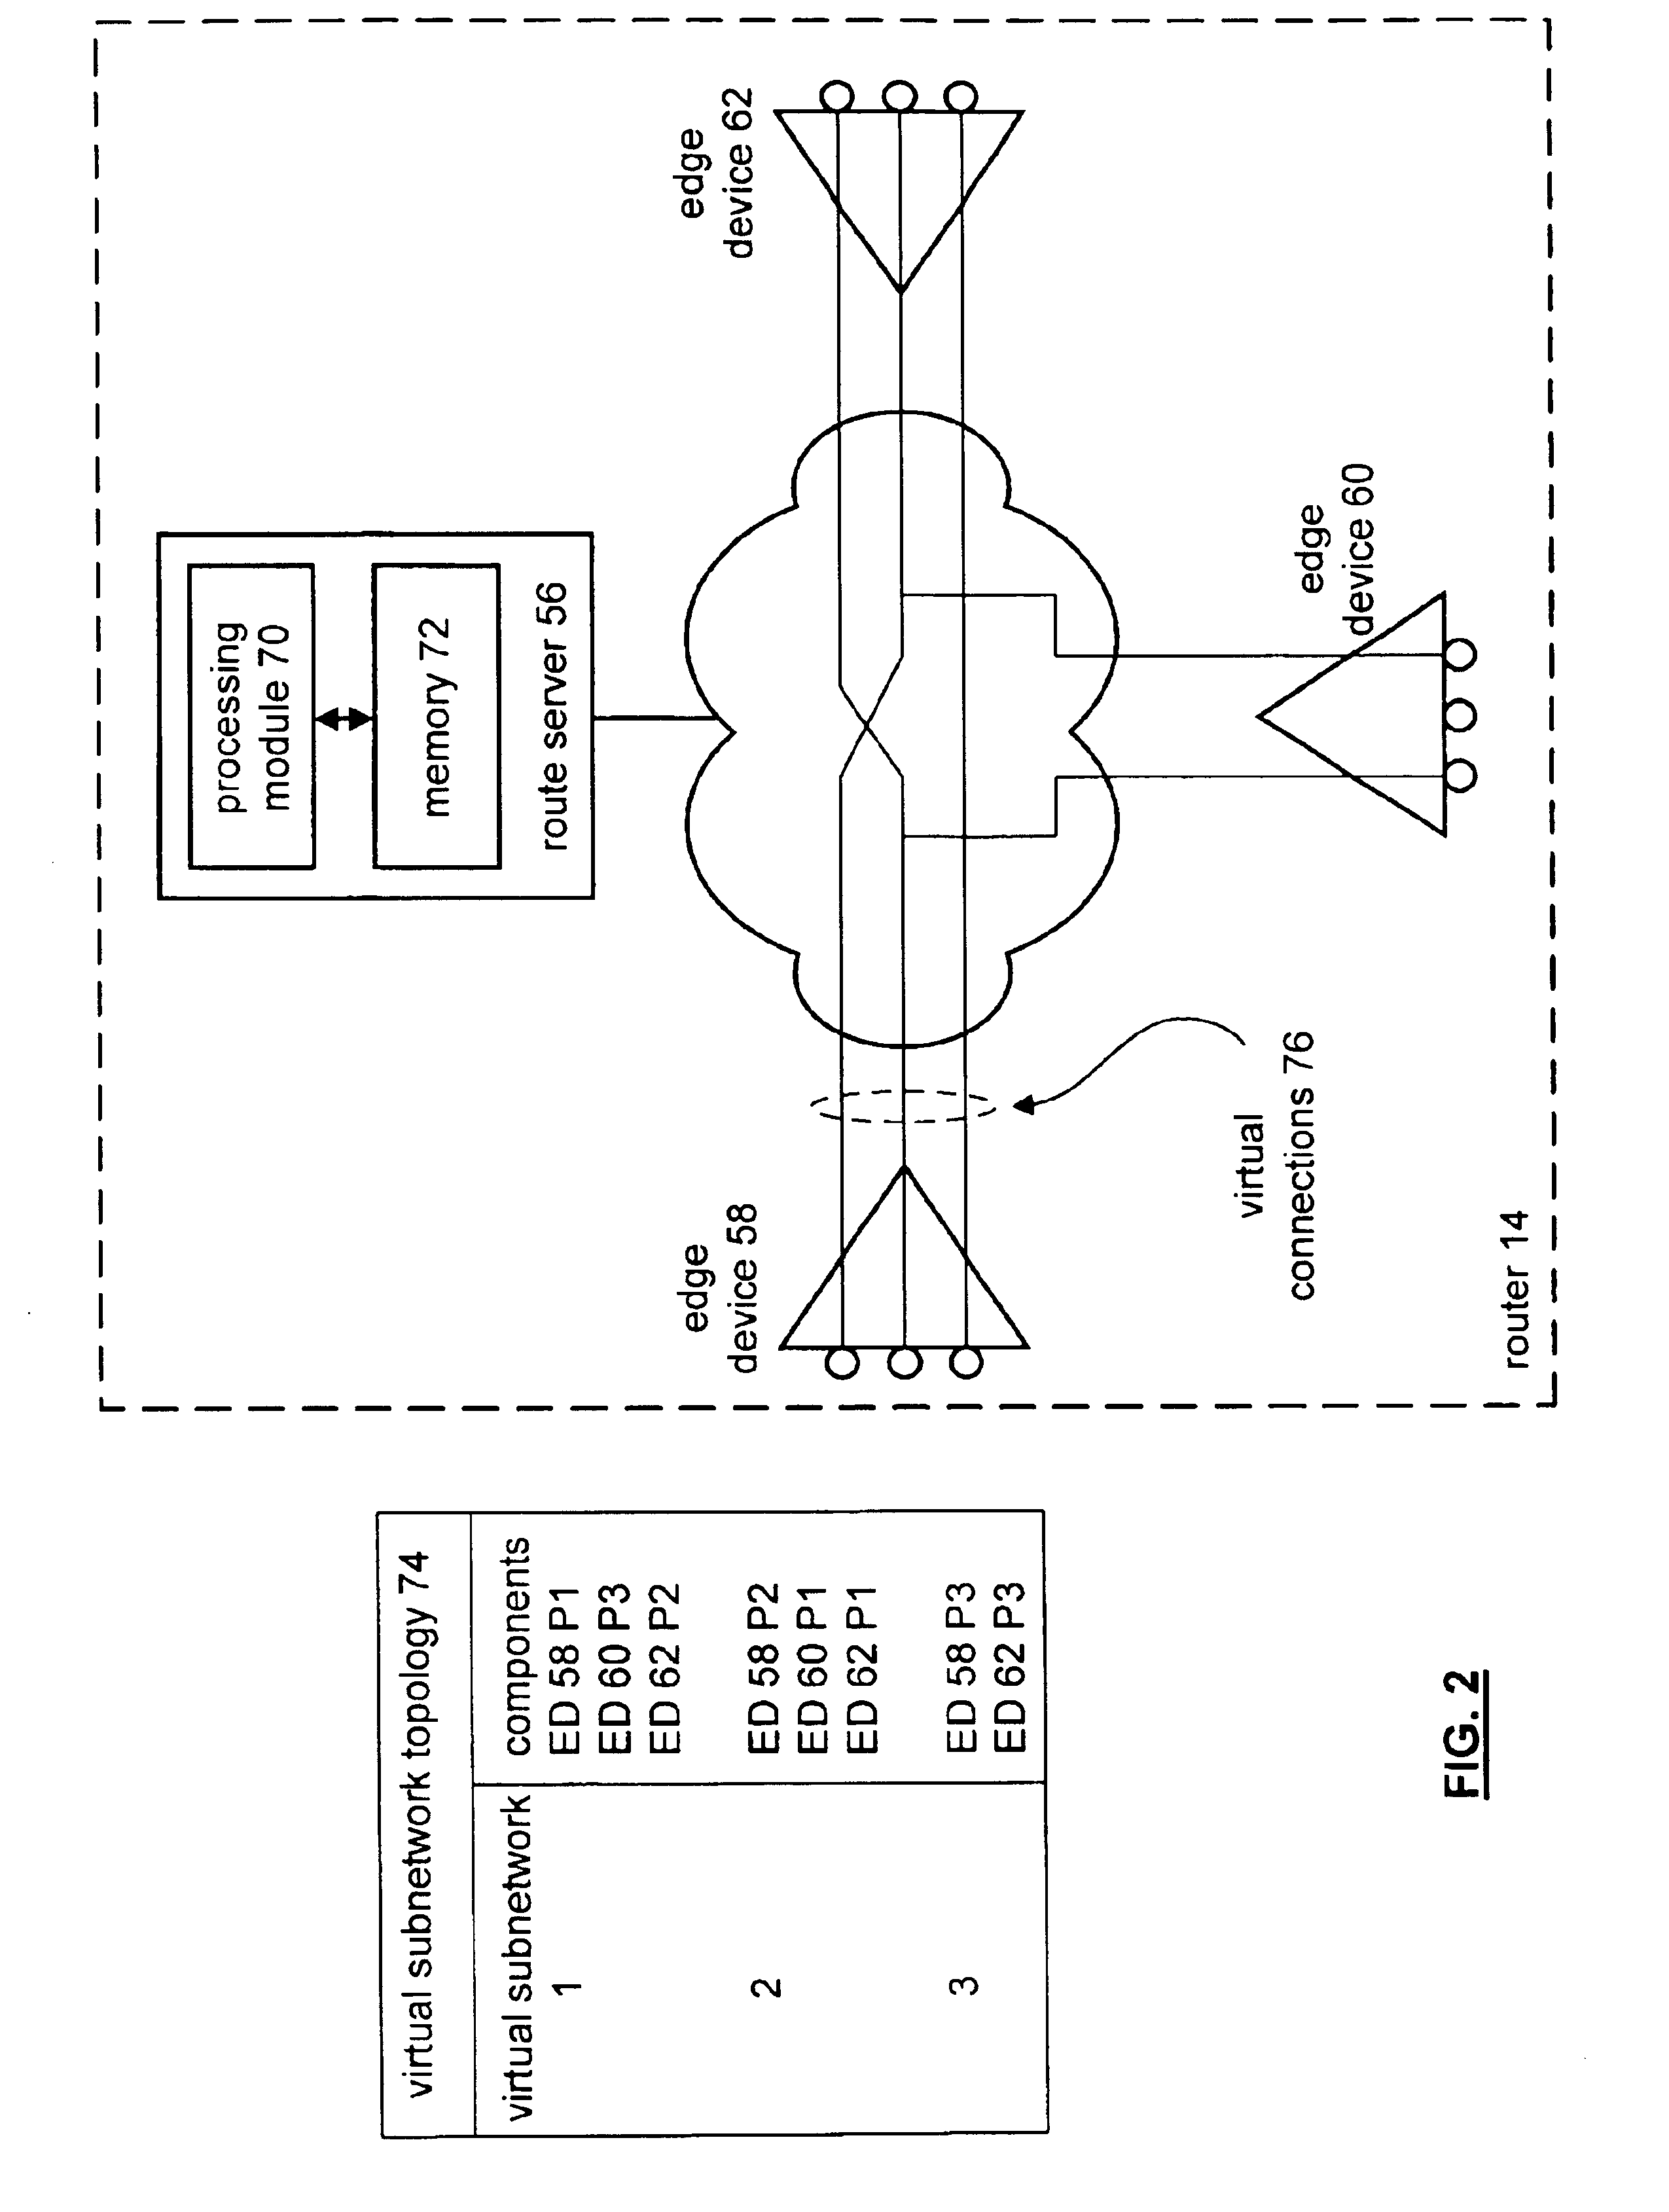 Method and apparatus for providing multi-cast transmissions using a distributed router